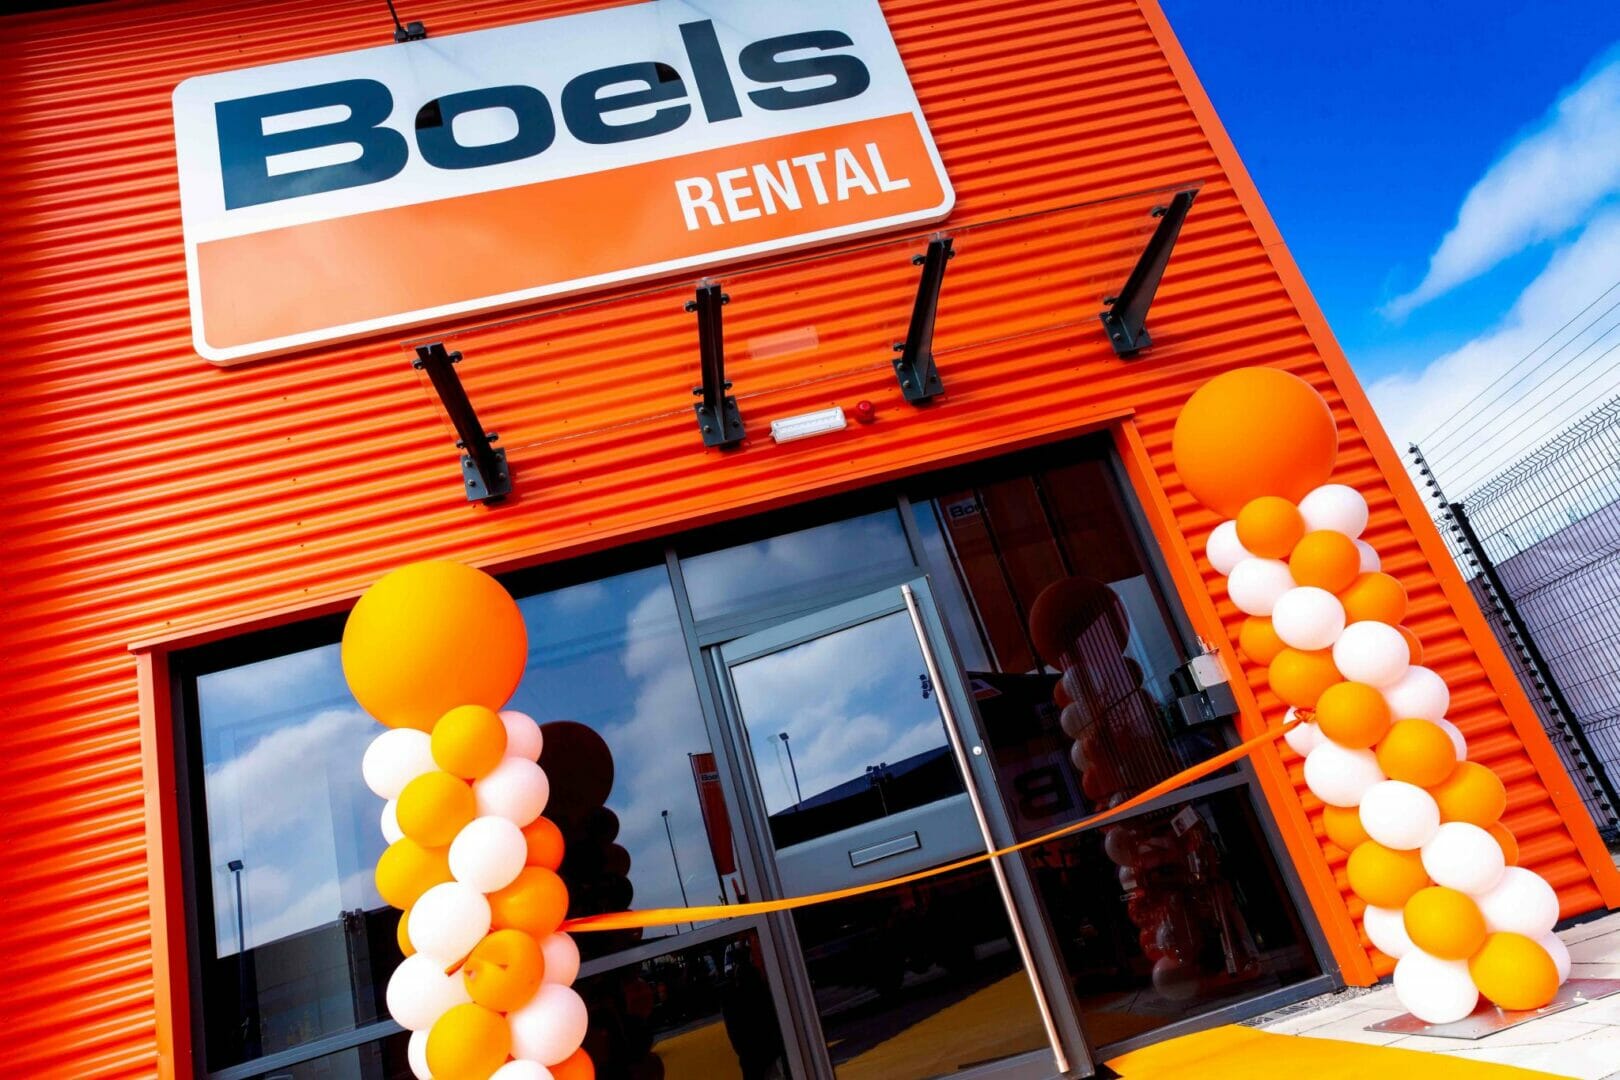 Another Depot opens for Boels Rental adding to their 400+ branches